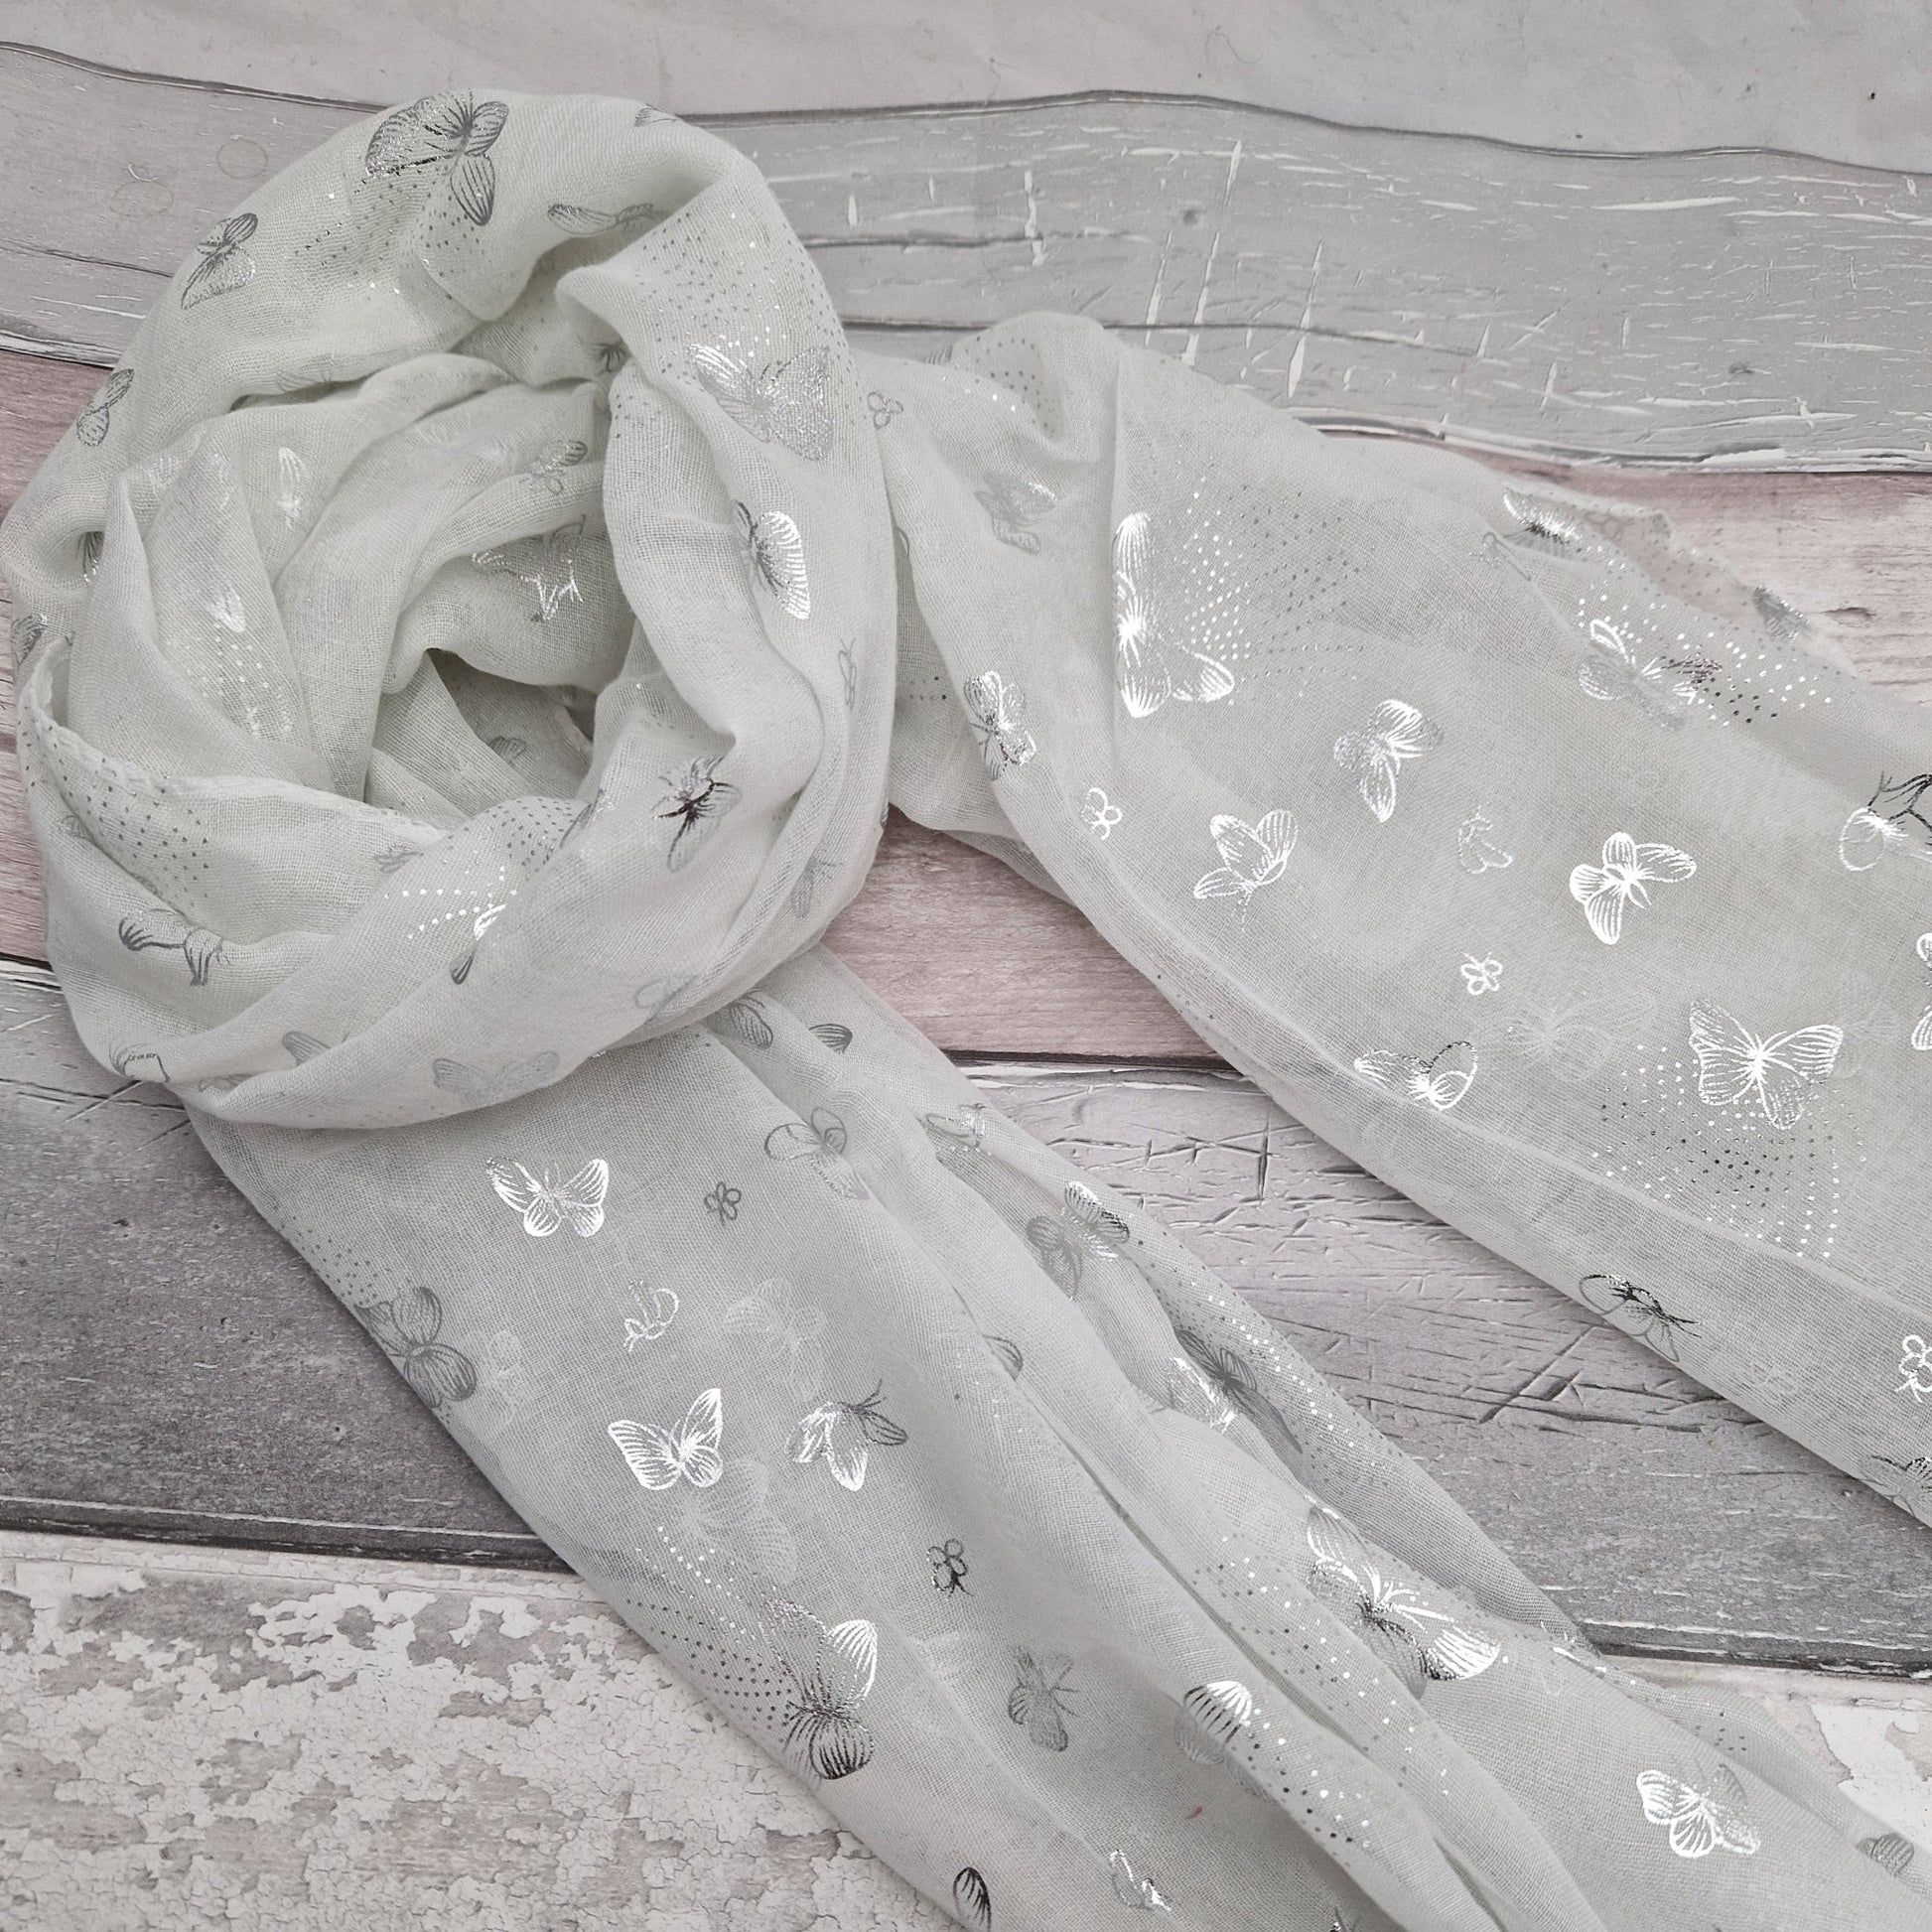 White scarf decorated with metallic silver butterflies.